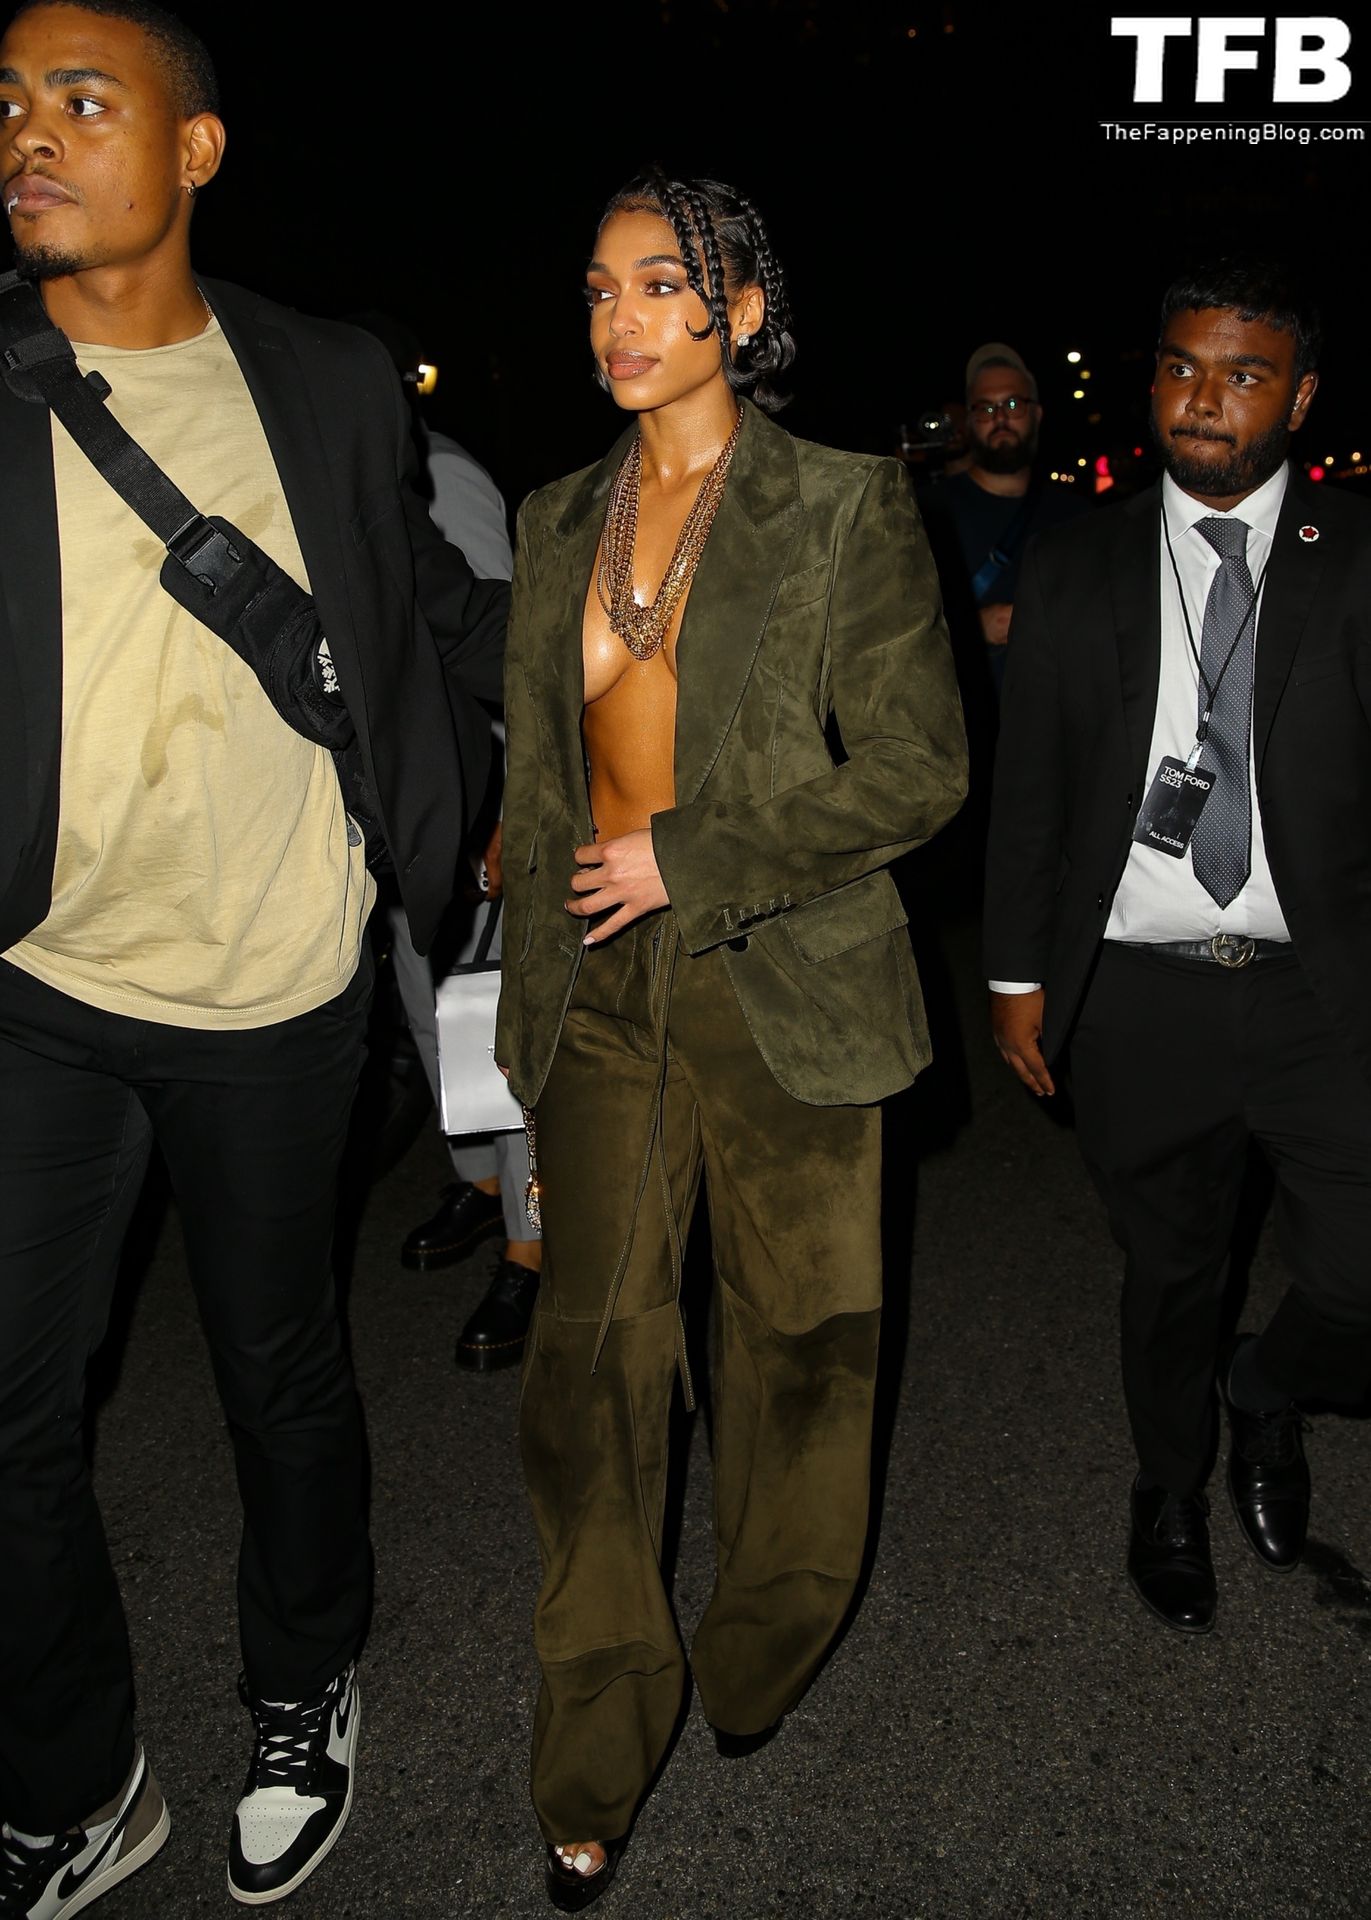 Lori Harvey Sexy The Fappening Blog 14 - Lori Harvey Shows Off Her Tits at the Tom Ford Fashion Show (38 Photos)